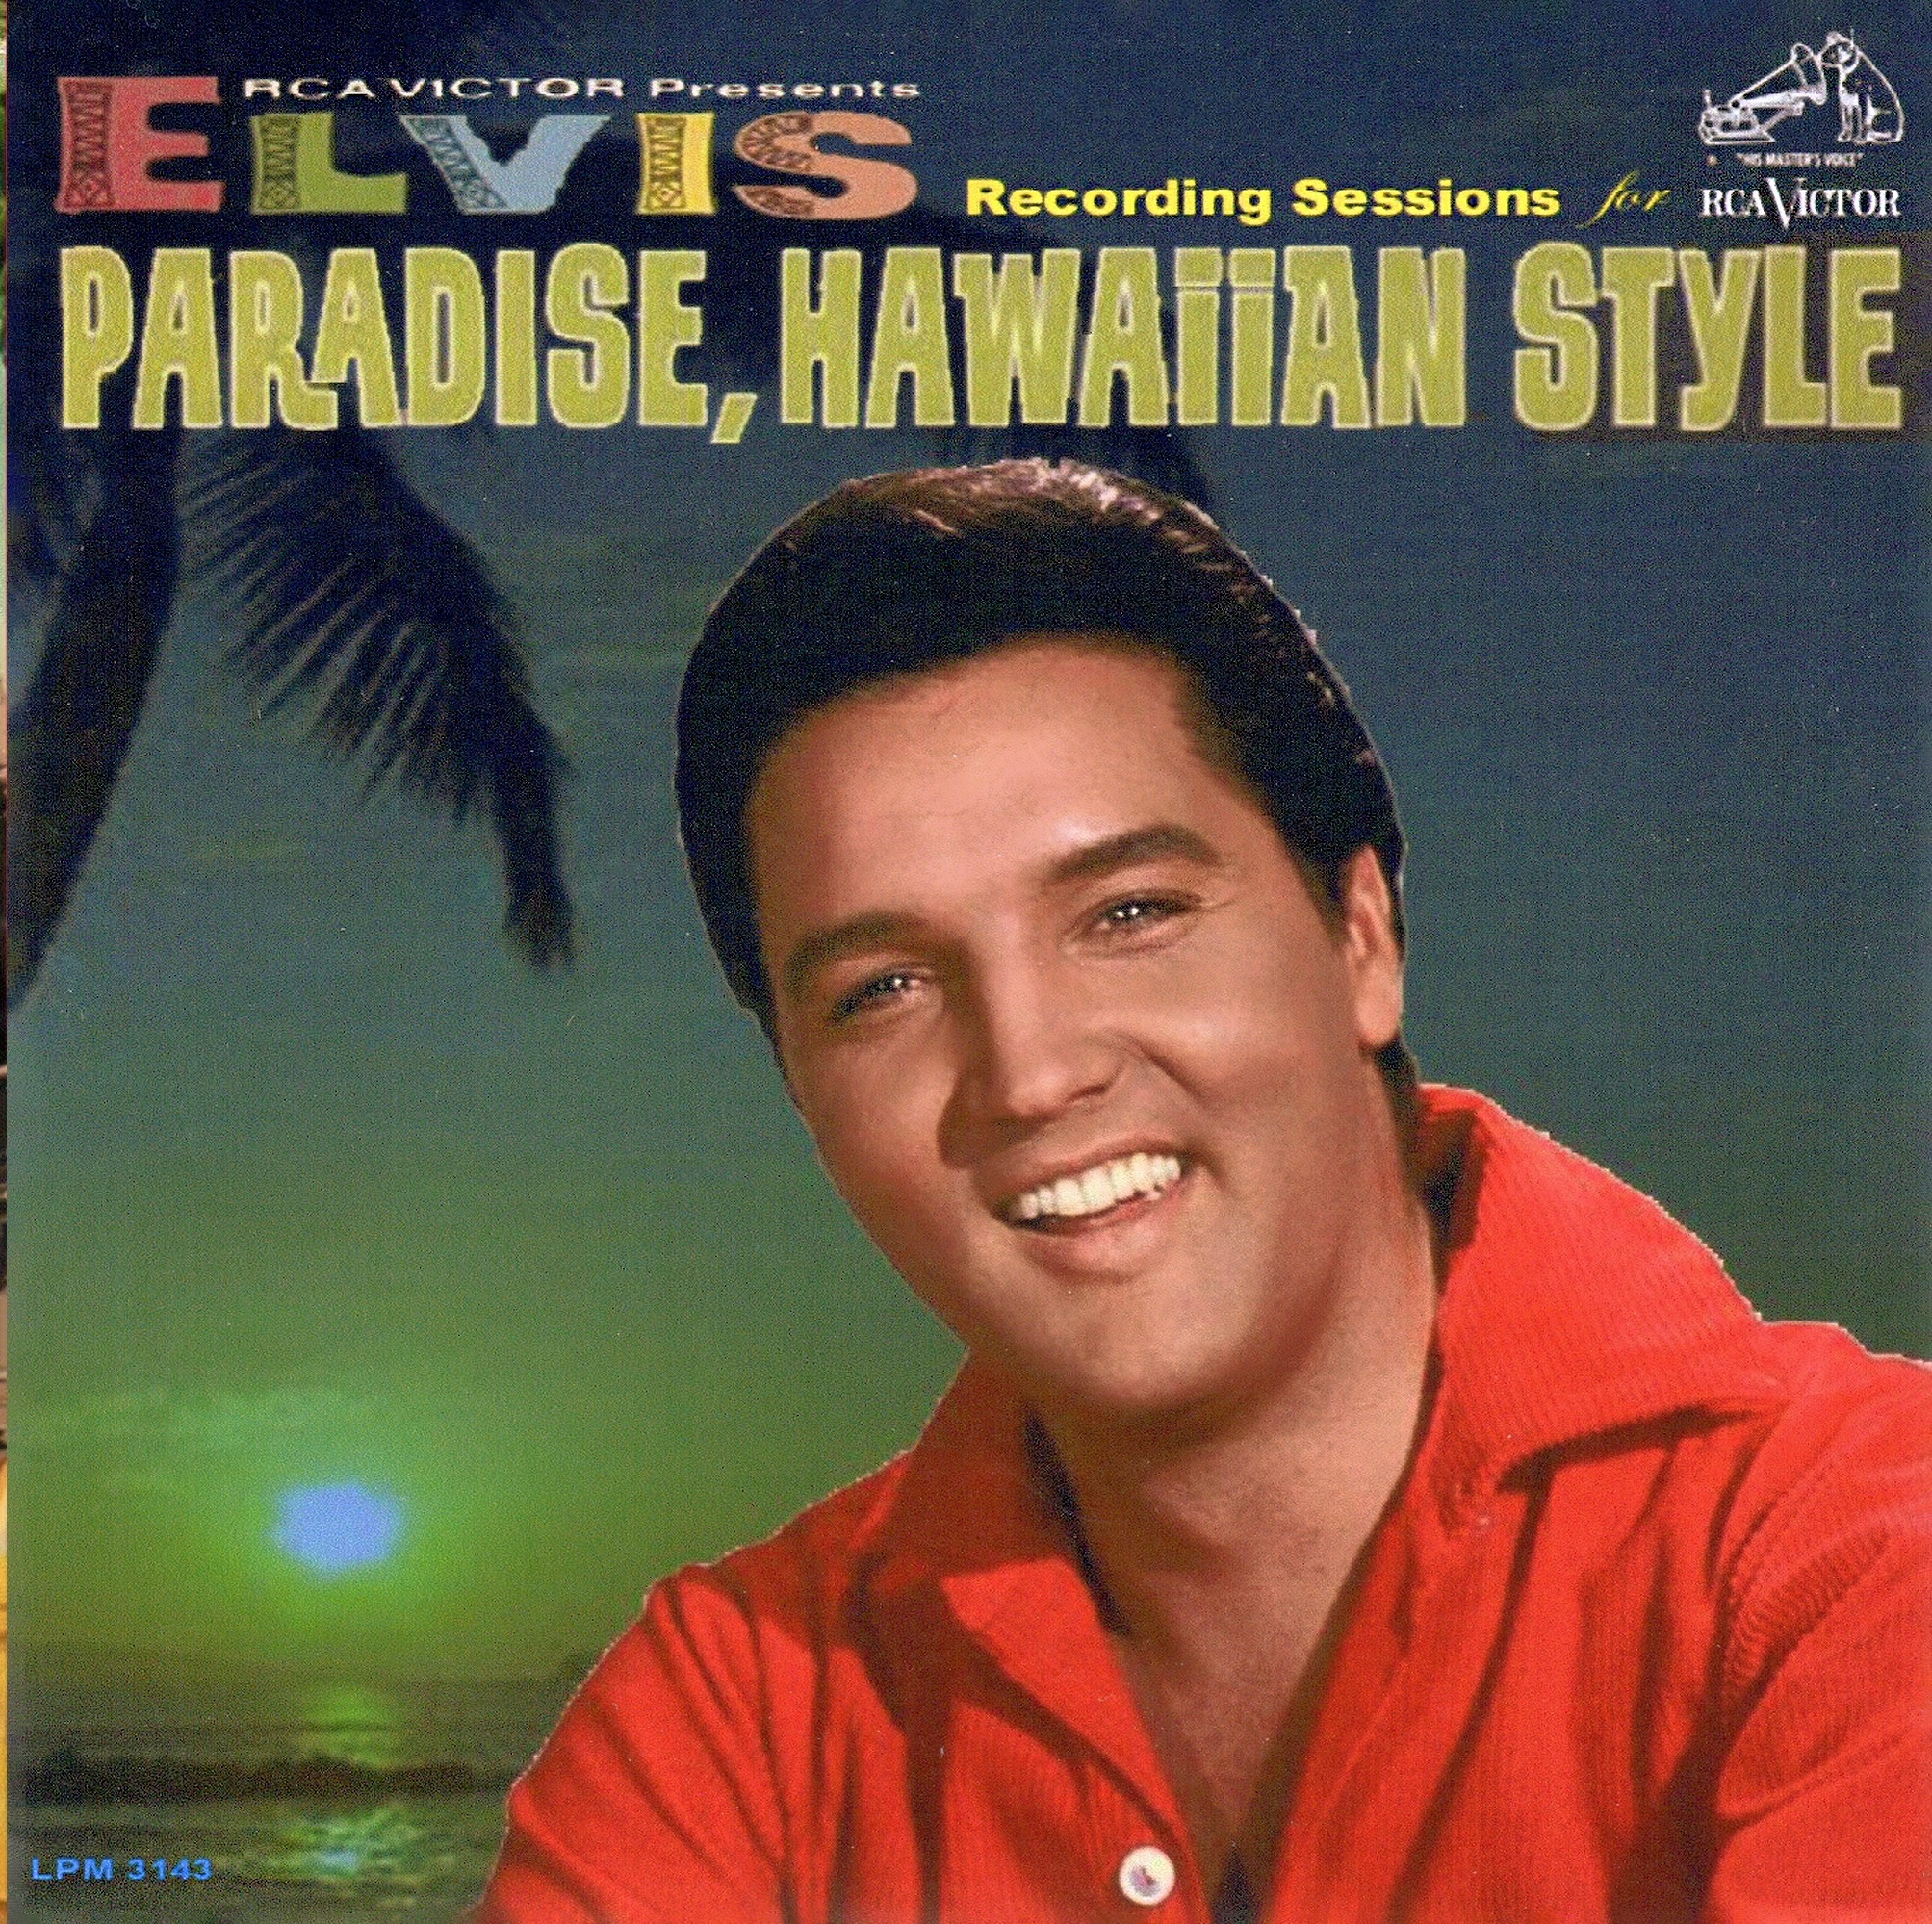 Elvis Presley - Recording Sessions For Paradise, Hawaiian Style [CMT Star LPM3143]